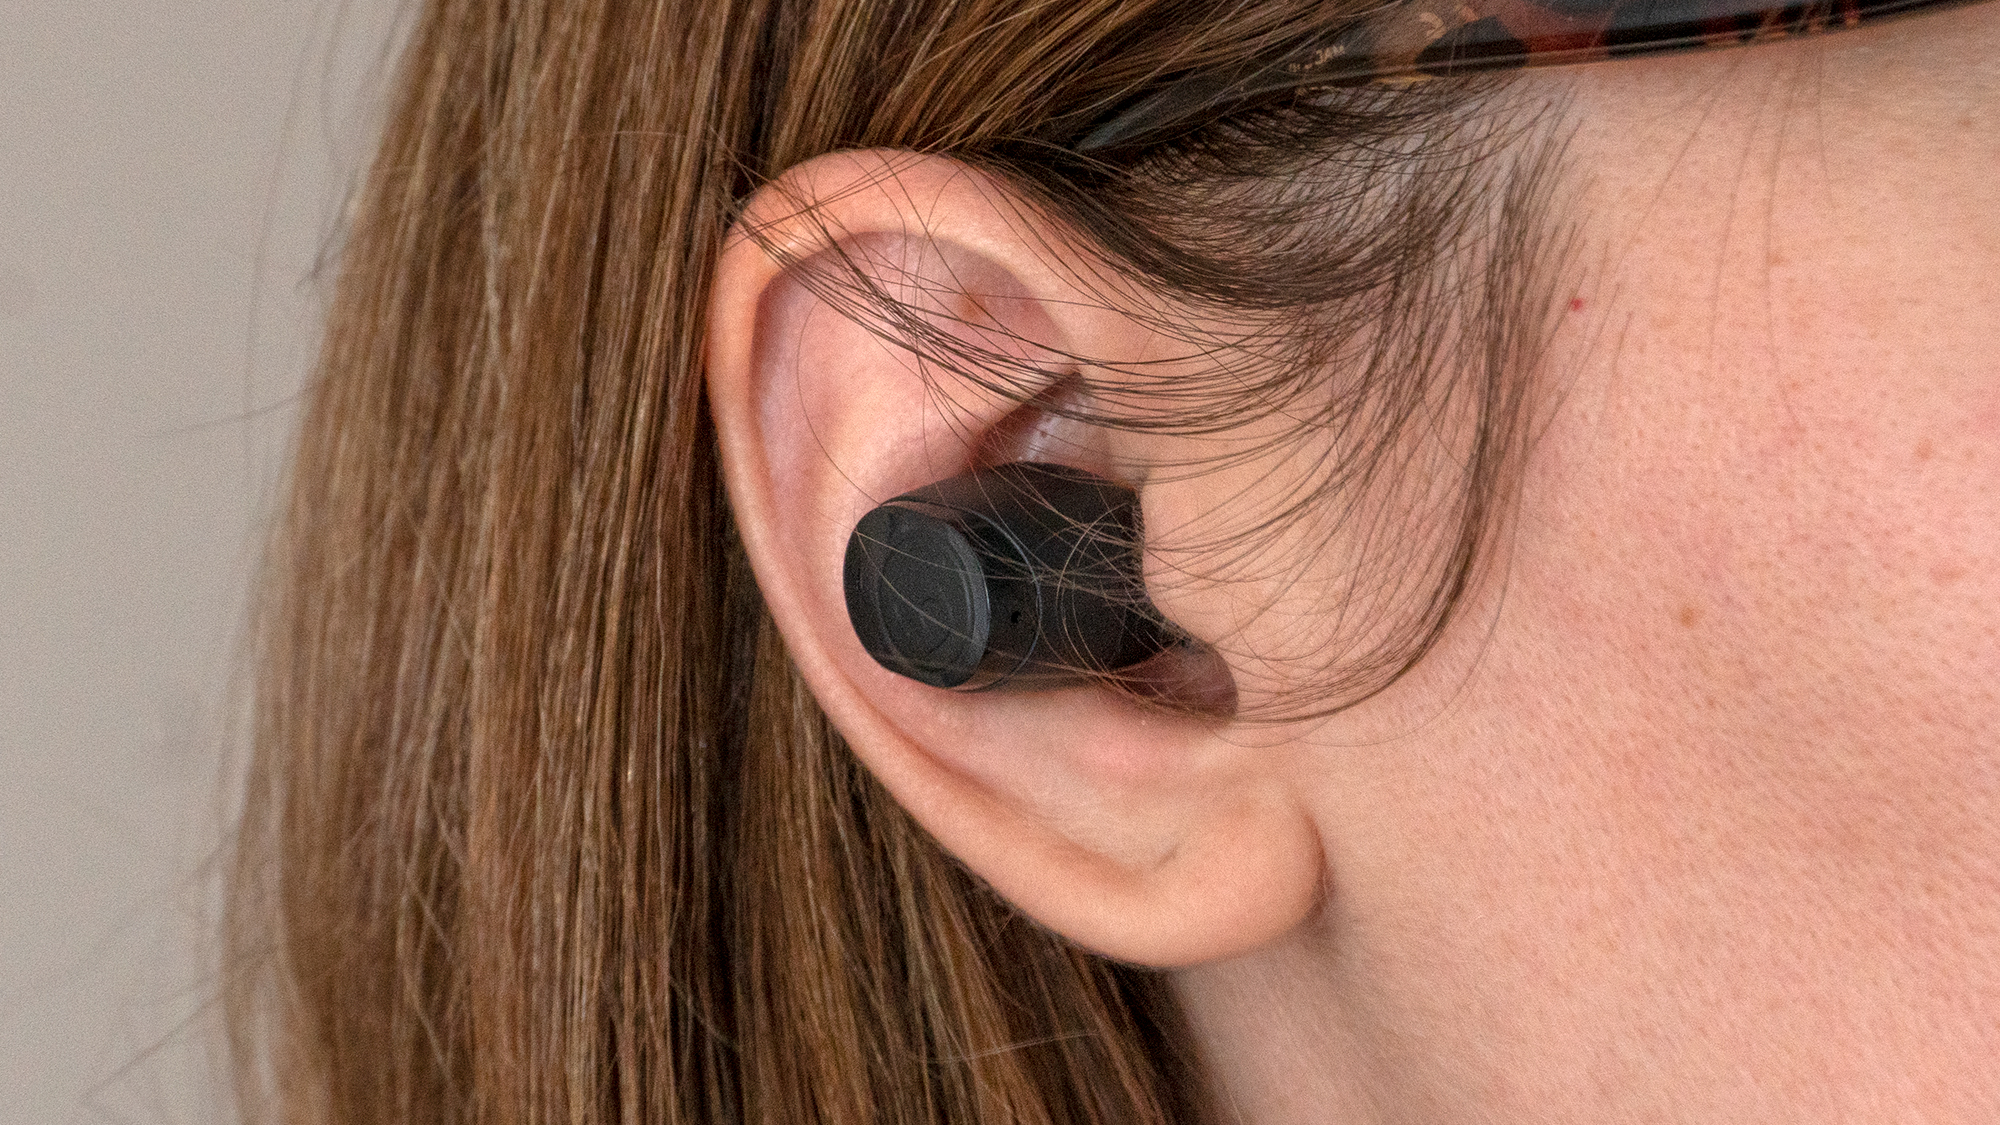 The Jib True wireless earbuds do stick out of your ears, but they're not the worst offenders. (Photo: Andrew Liszewski/Gizmodo)